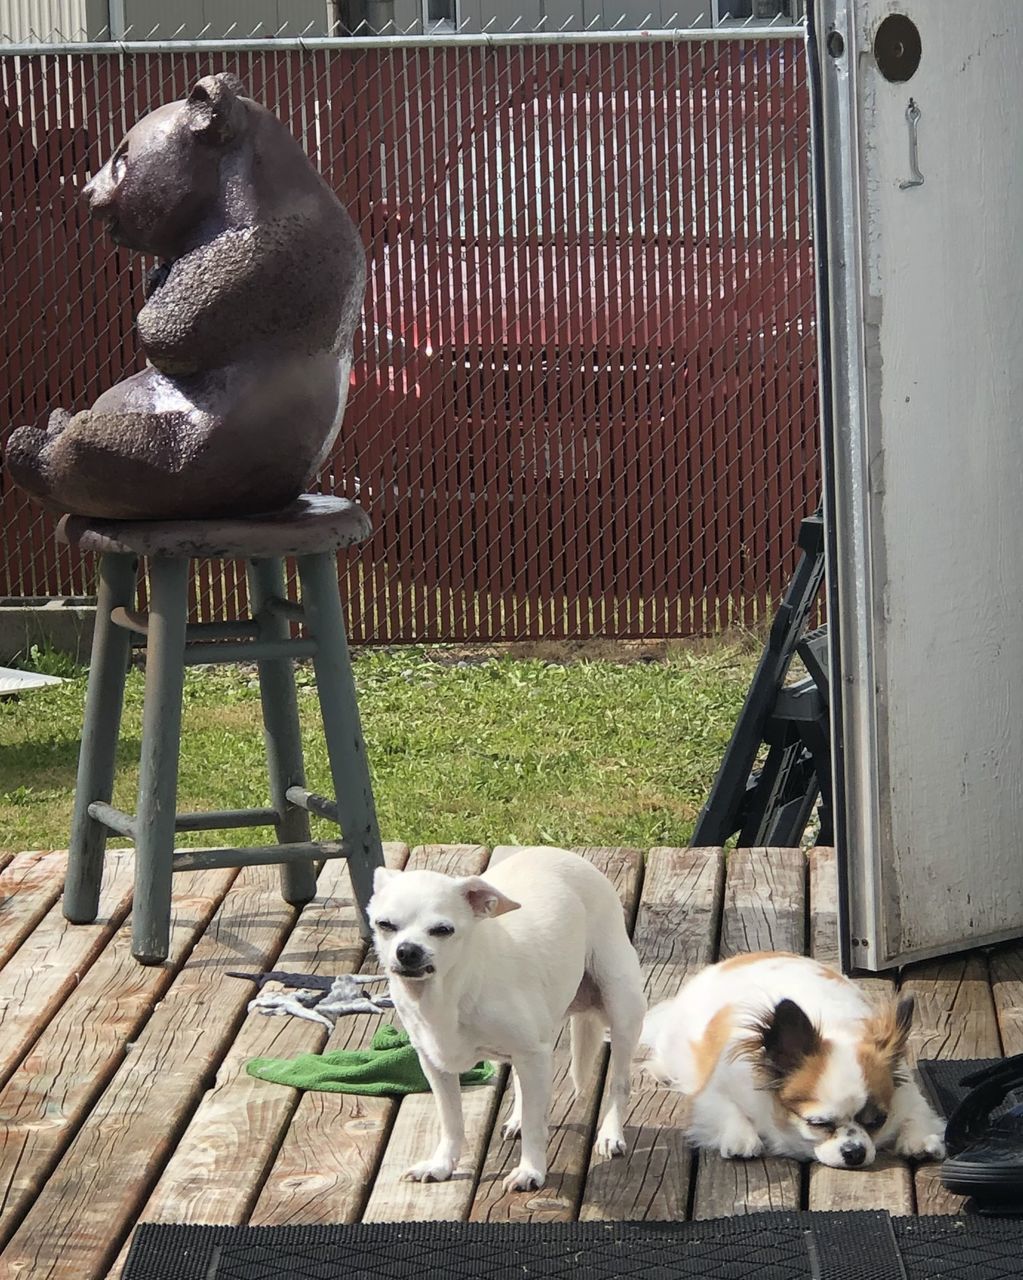 DOGS STANDING ON METAL